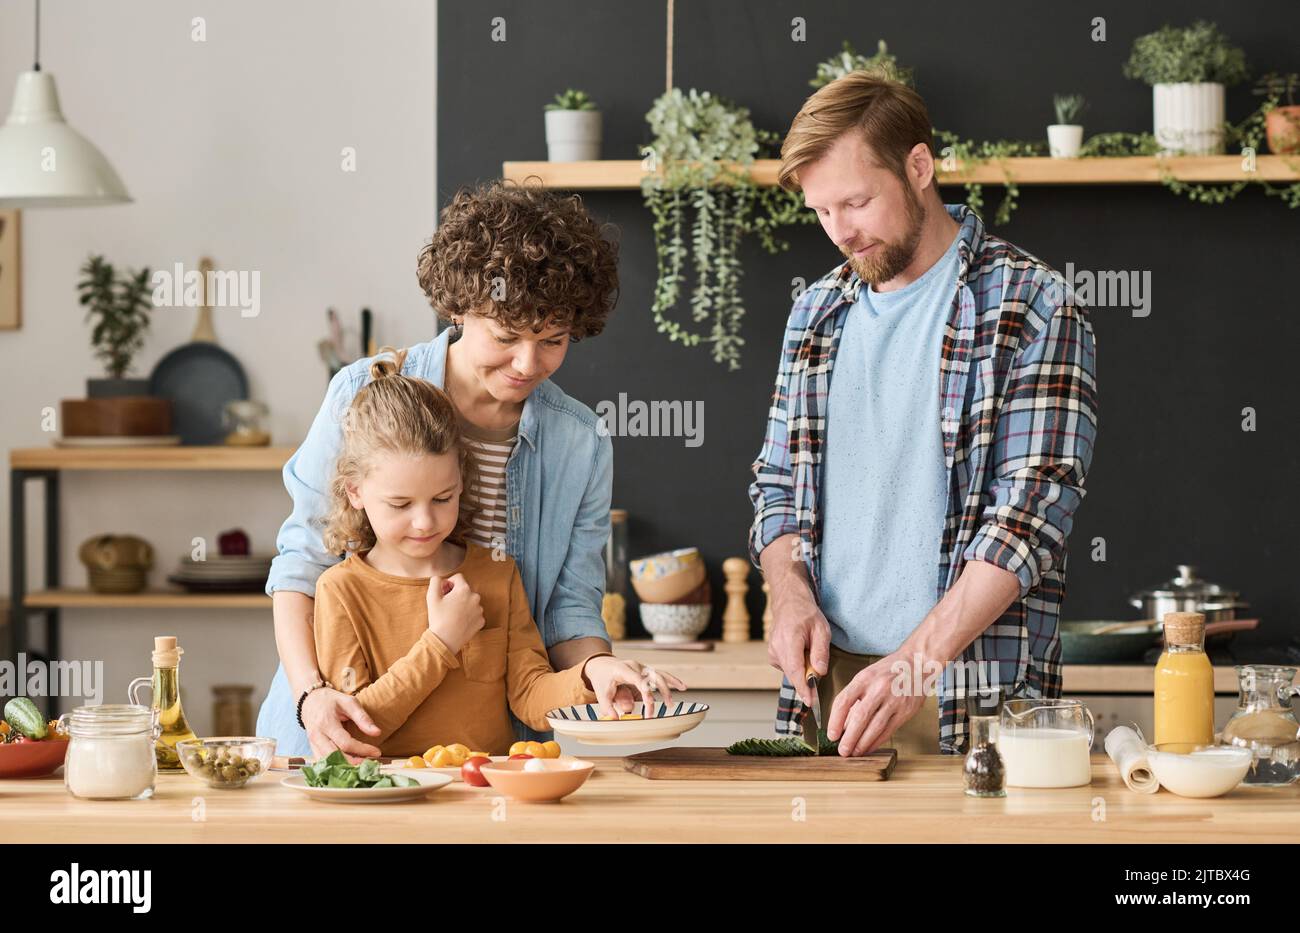 Young parents preparing dinner at table in kitchen together with their child Stock Photo